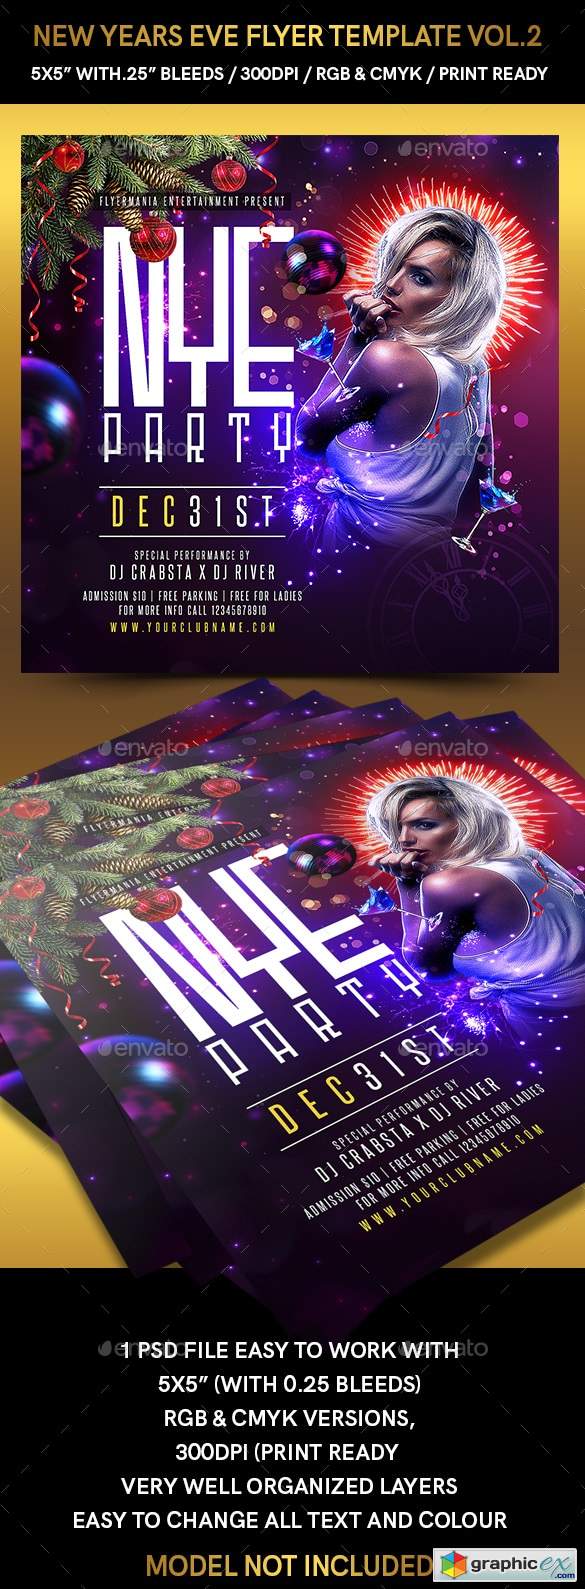 New Years Eve Flyer Template Vol 2